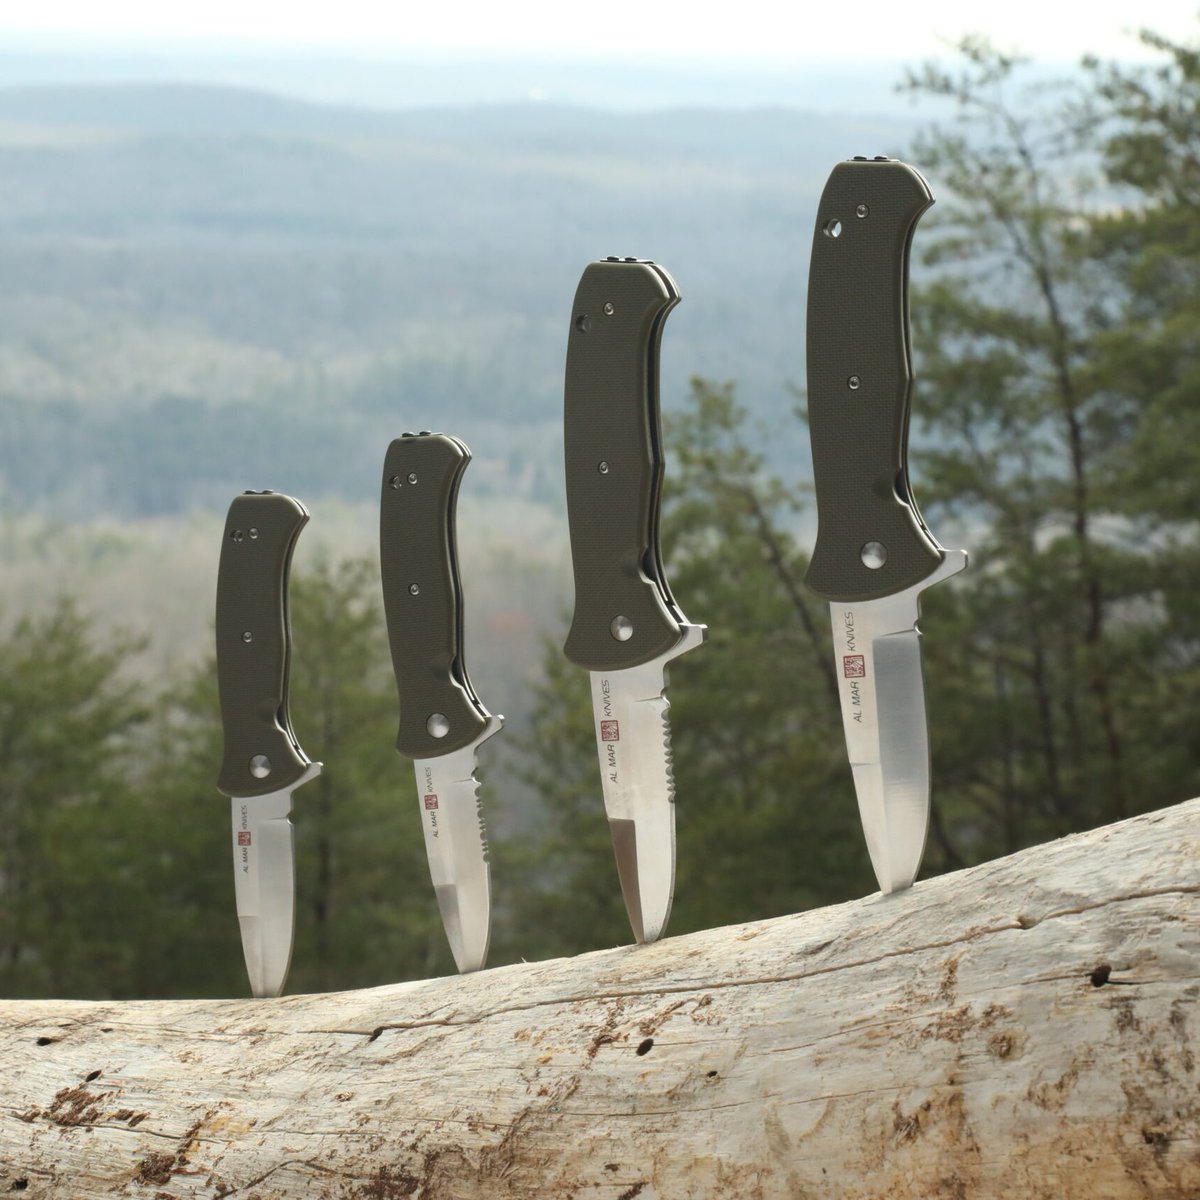 Forged with a commitment to quality. Discover the Al Mar Knives difference. #knife #knives #knifelife #everydaycarry #handmade #knifecut #knifemaker #knifemaking #blade 

bit.ly/42brDKs